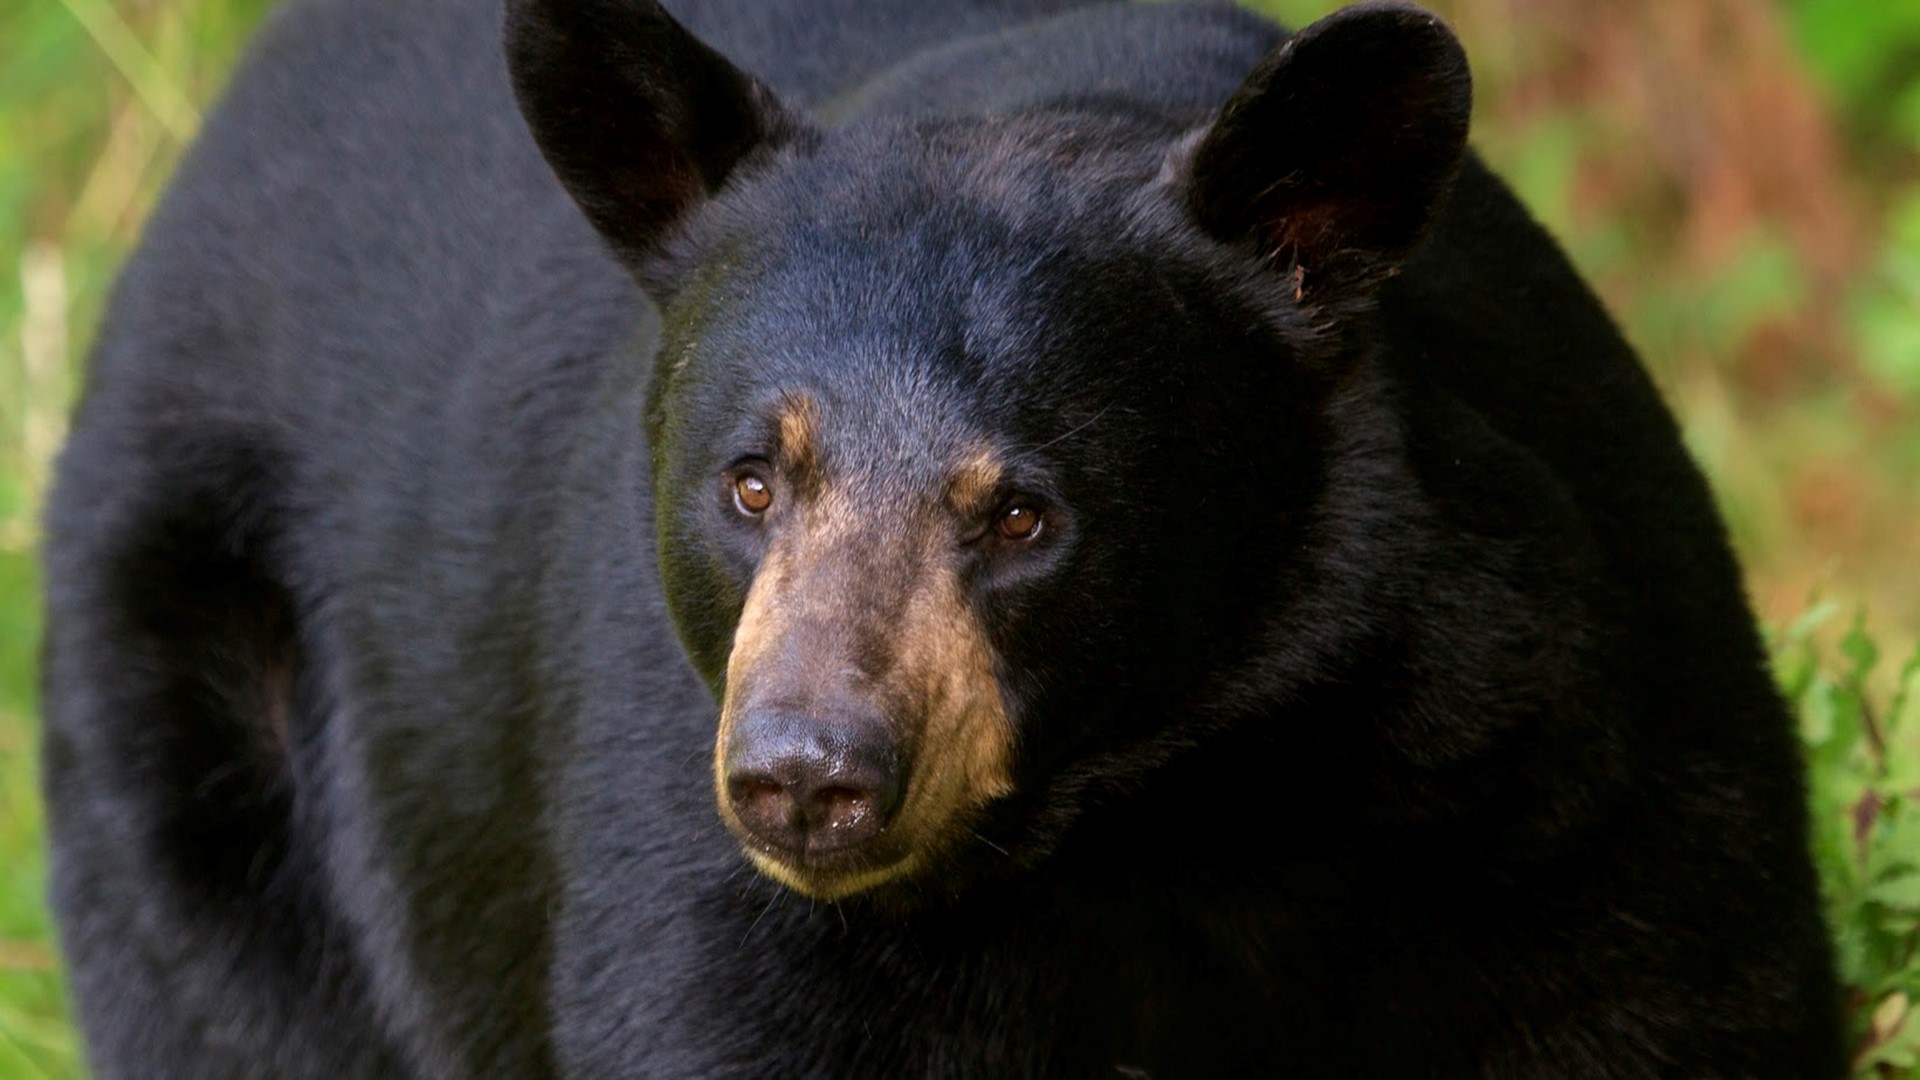 The Washington Department of Fish and Wildlife said the decision to euthanize the bear was made for public safety.